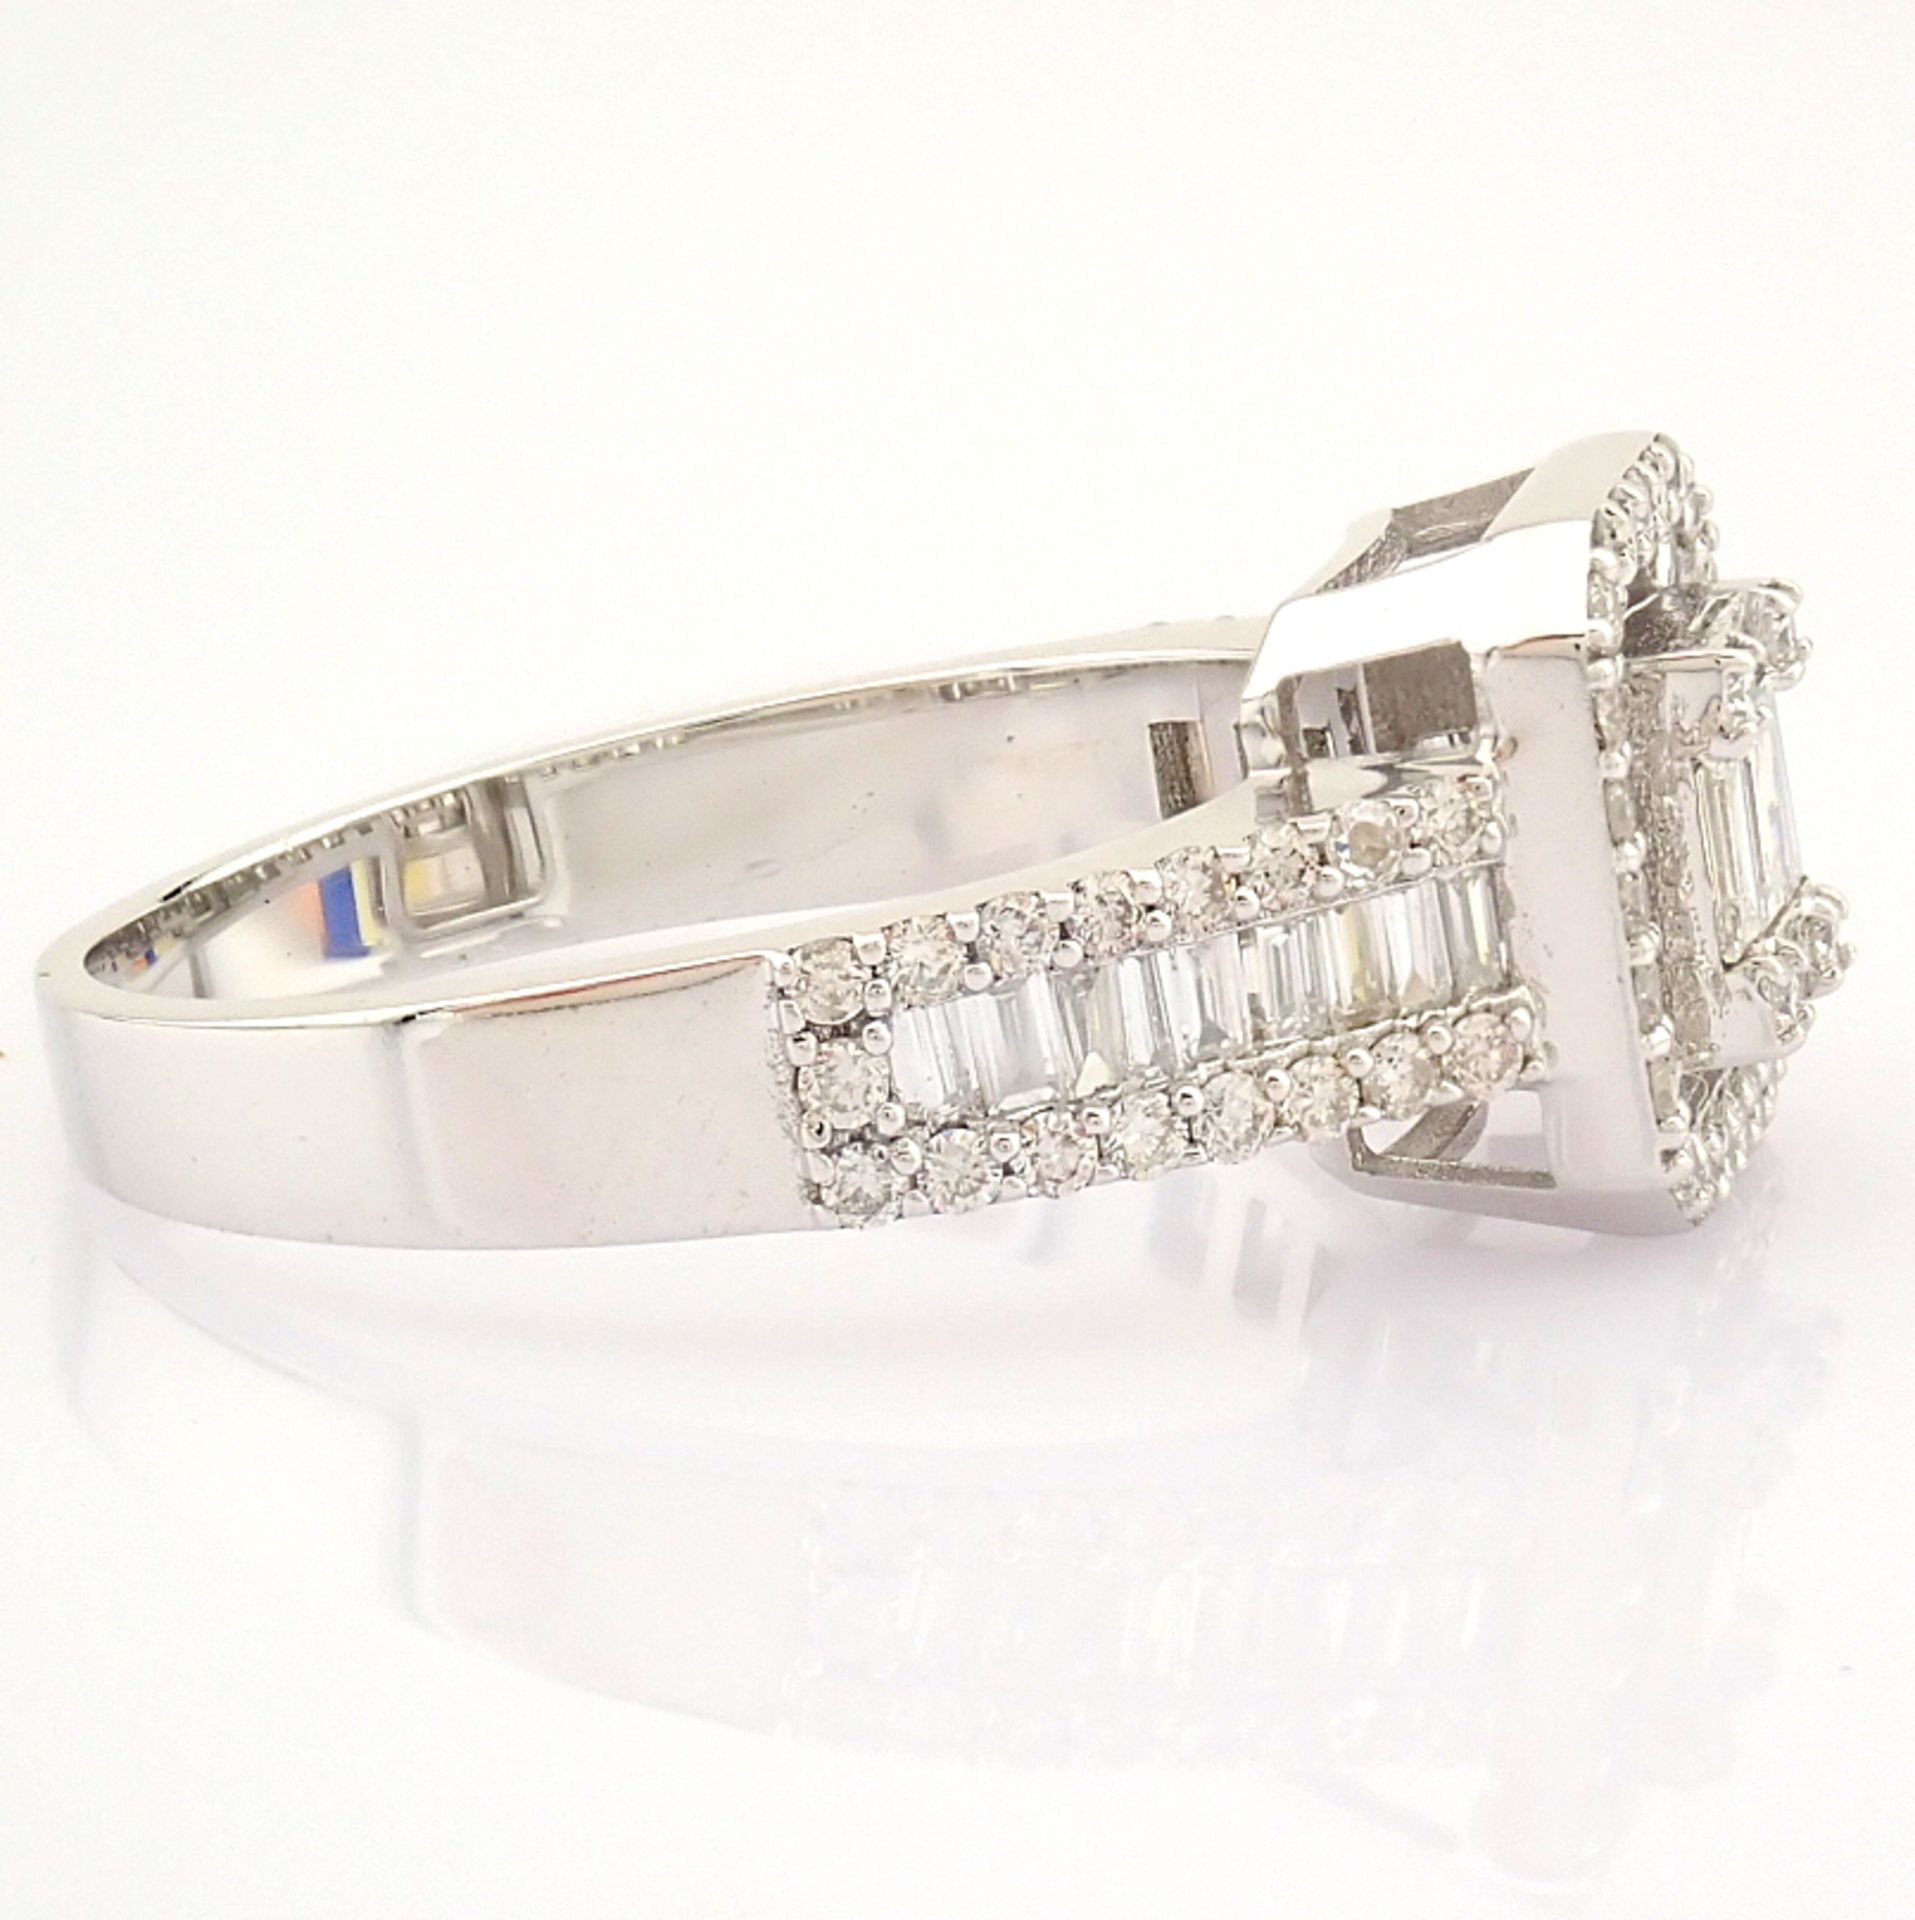 Certificated 14K White Gold Baguette Diamond & Diamond Ring (Total 0.59 ct Stone) - Image 7 of 8